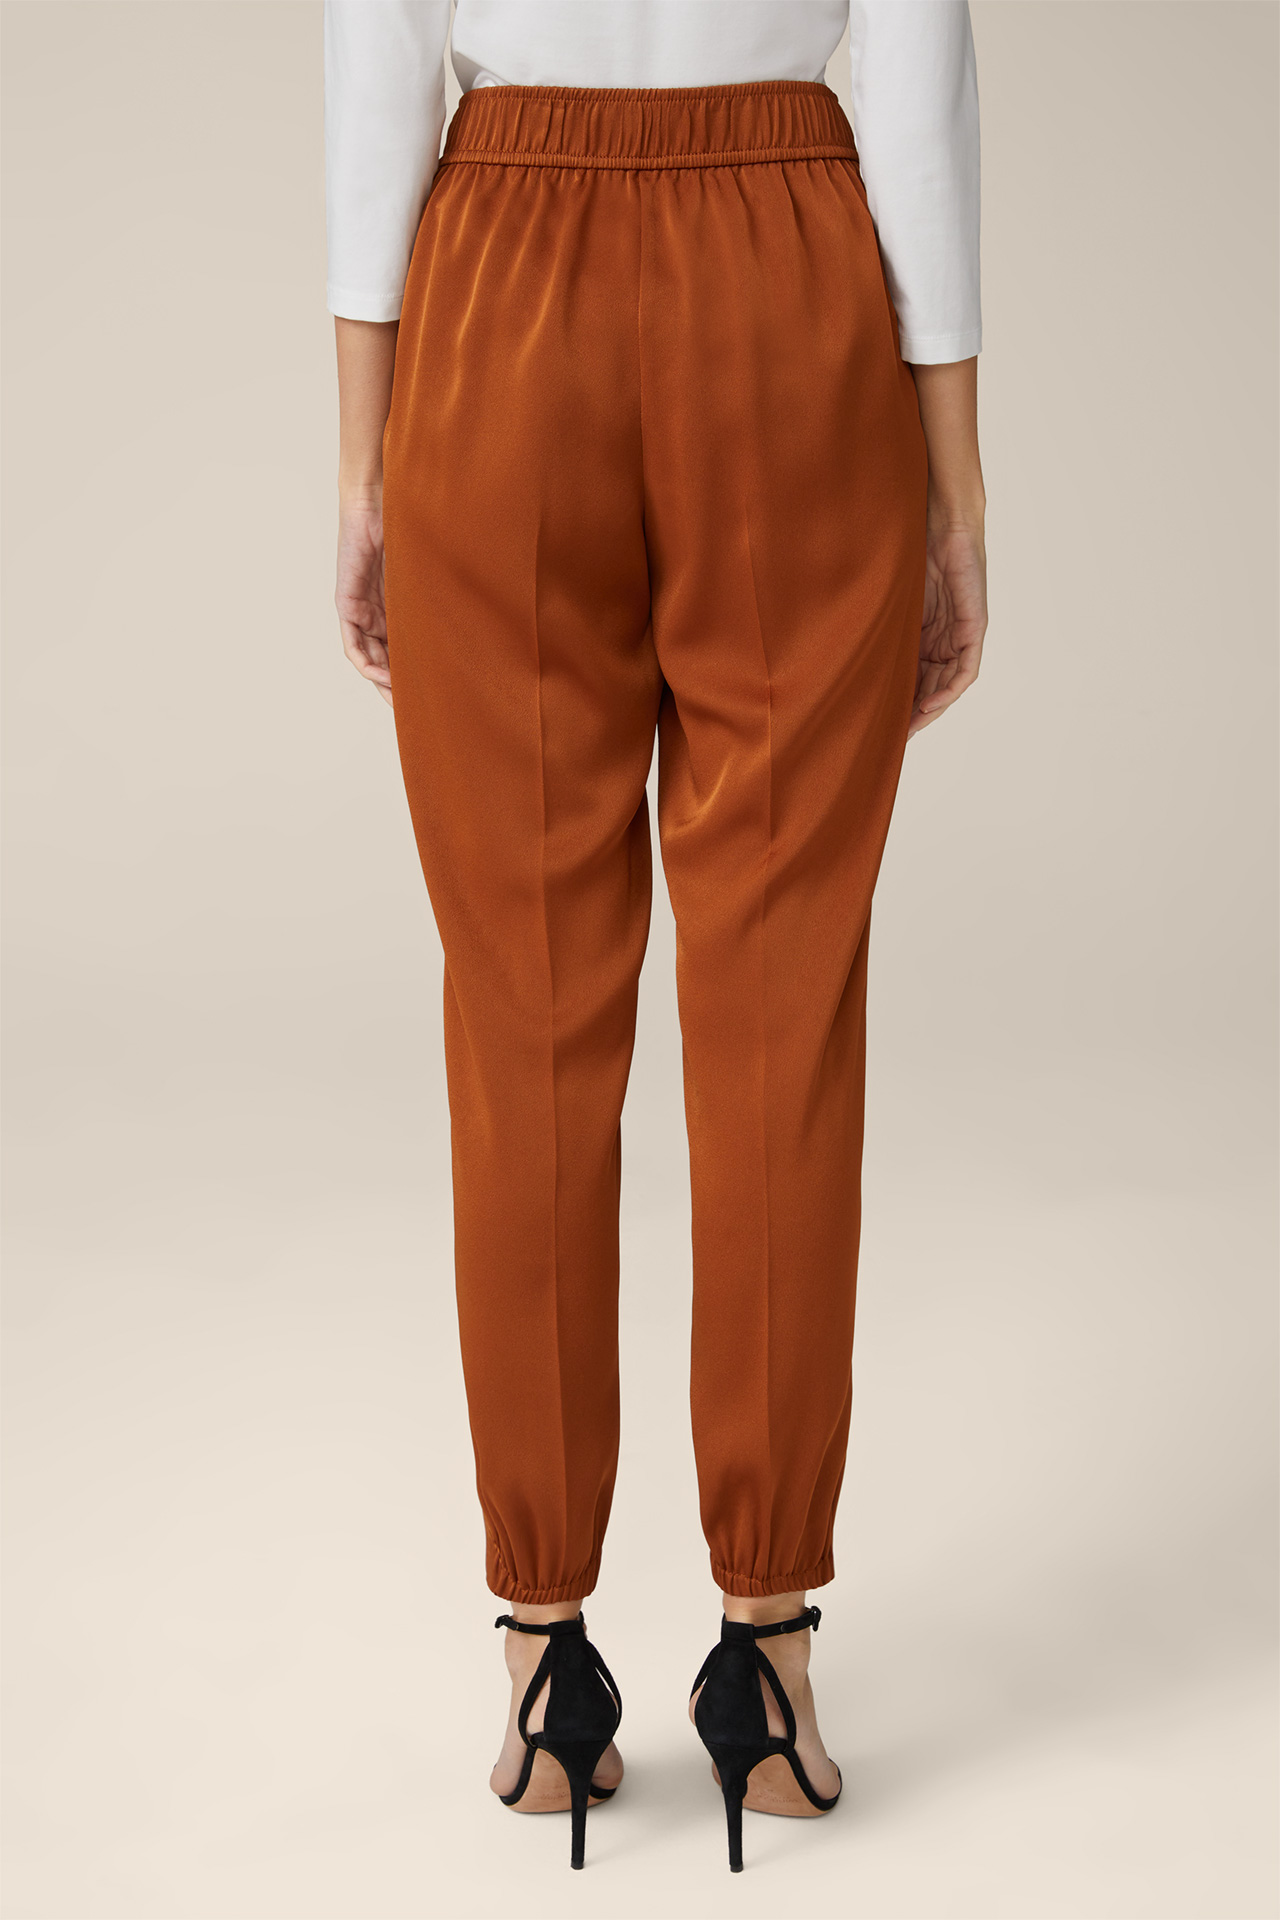 Crêpe Jogger-Style Trousers in Copper